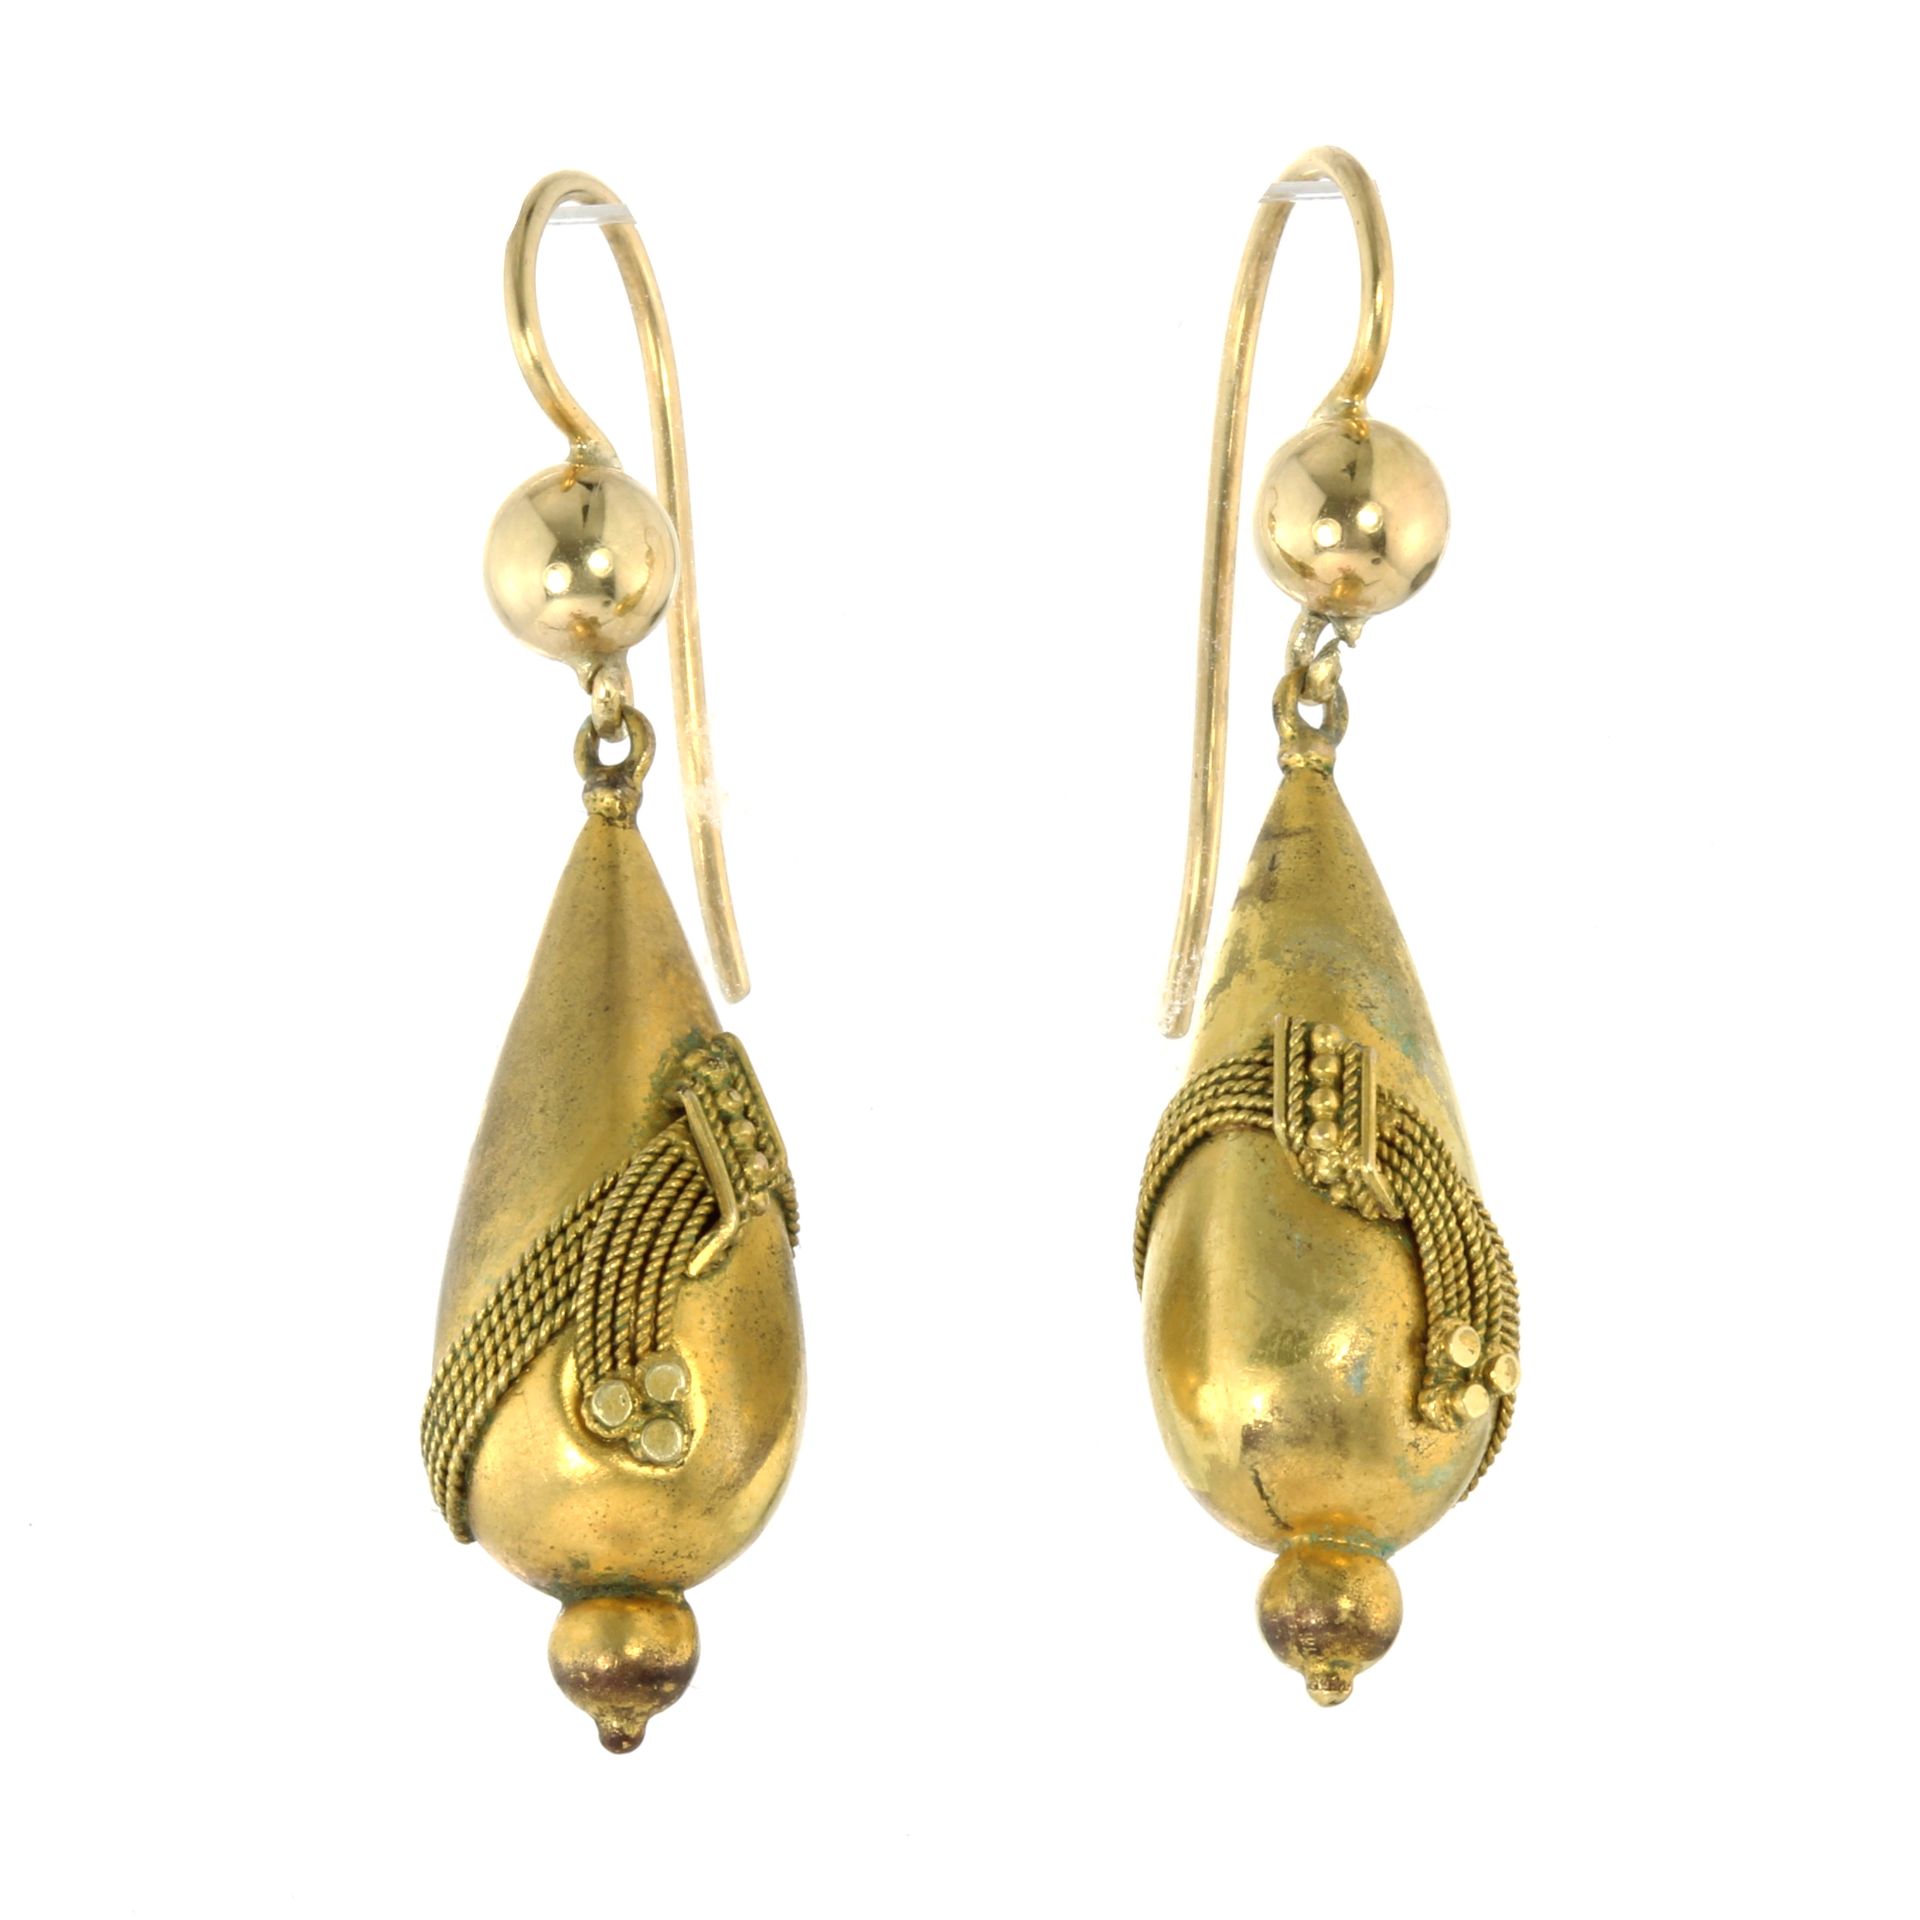 A PAIR OF ANTIQUE DROP EARRINGS in high carat yellow gold, each designed as a tapering drop with